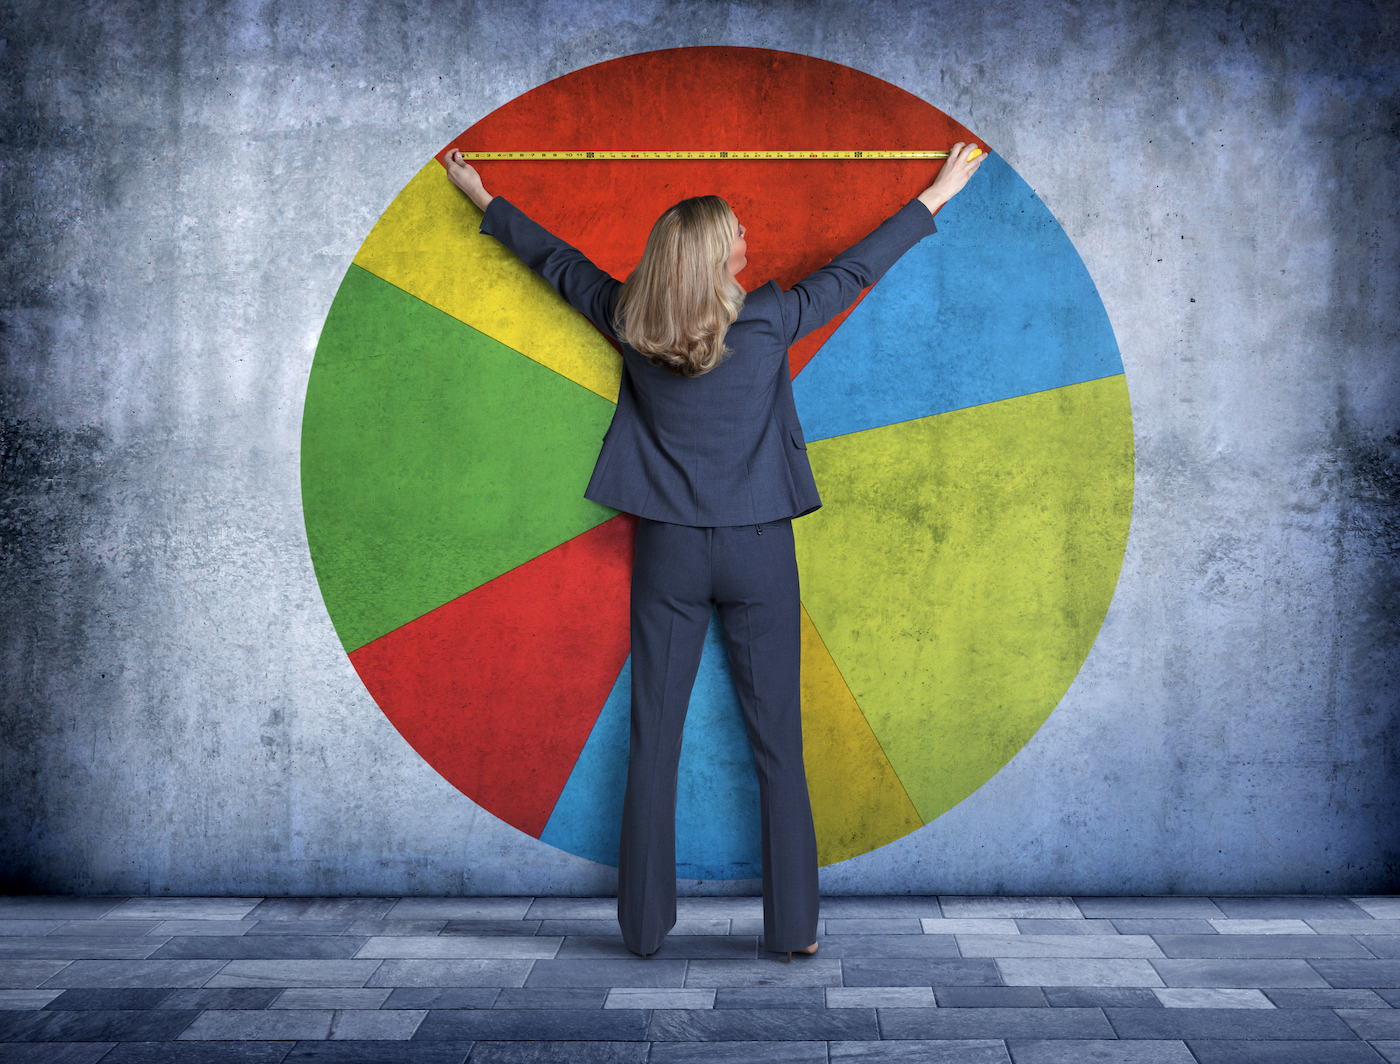 A businesswoman, using a measuring tape, reaches out to measure her piece of the pie on a large pie chart that is projected onto a concrete wall.